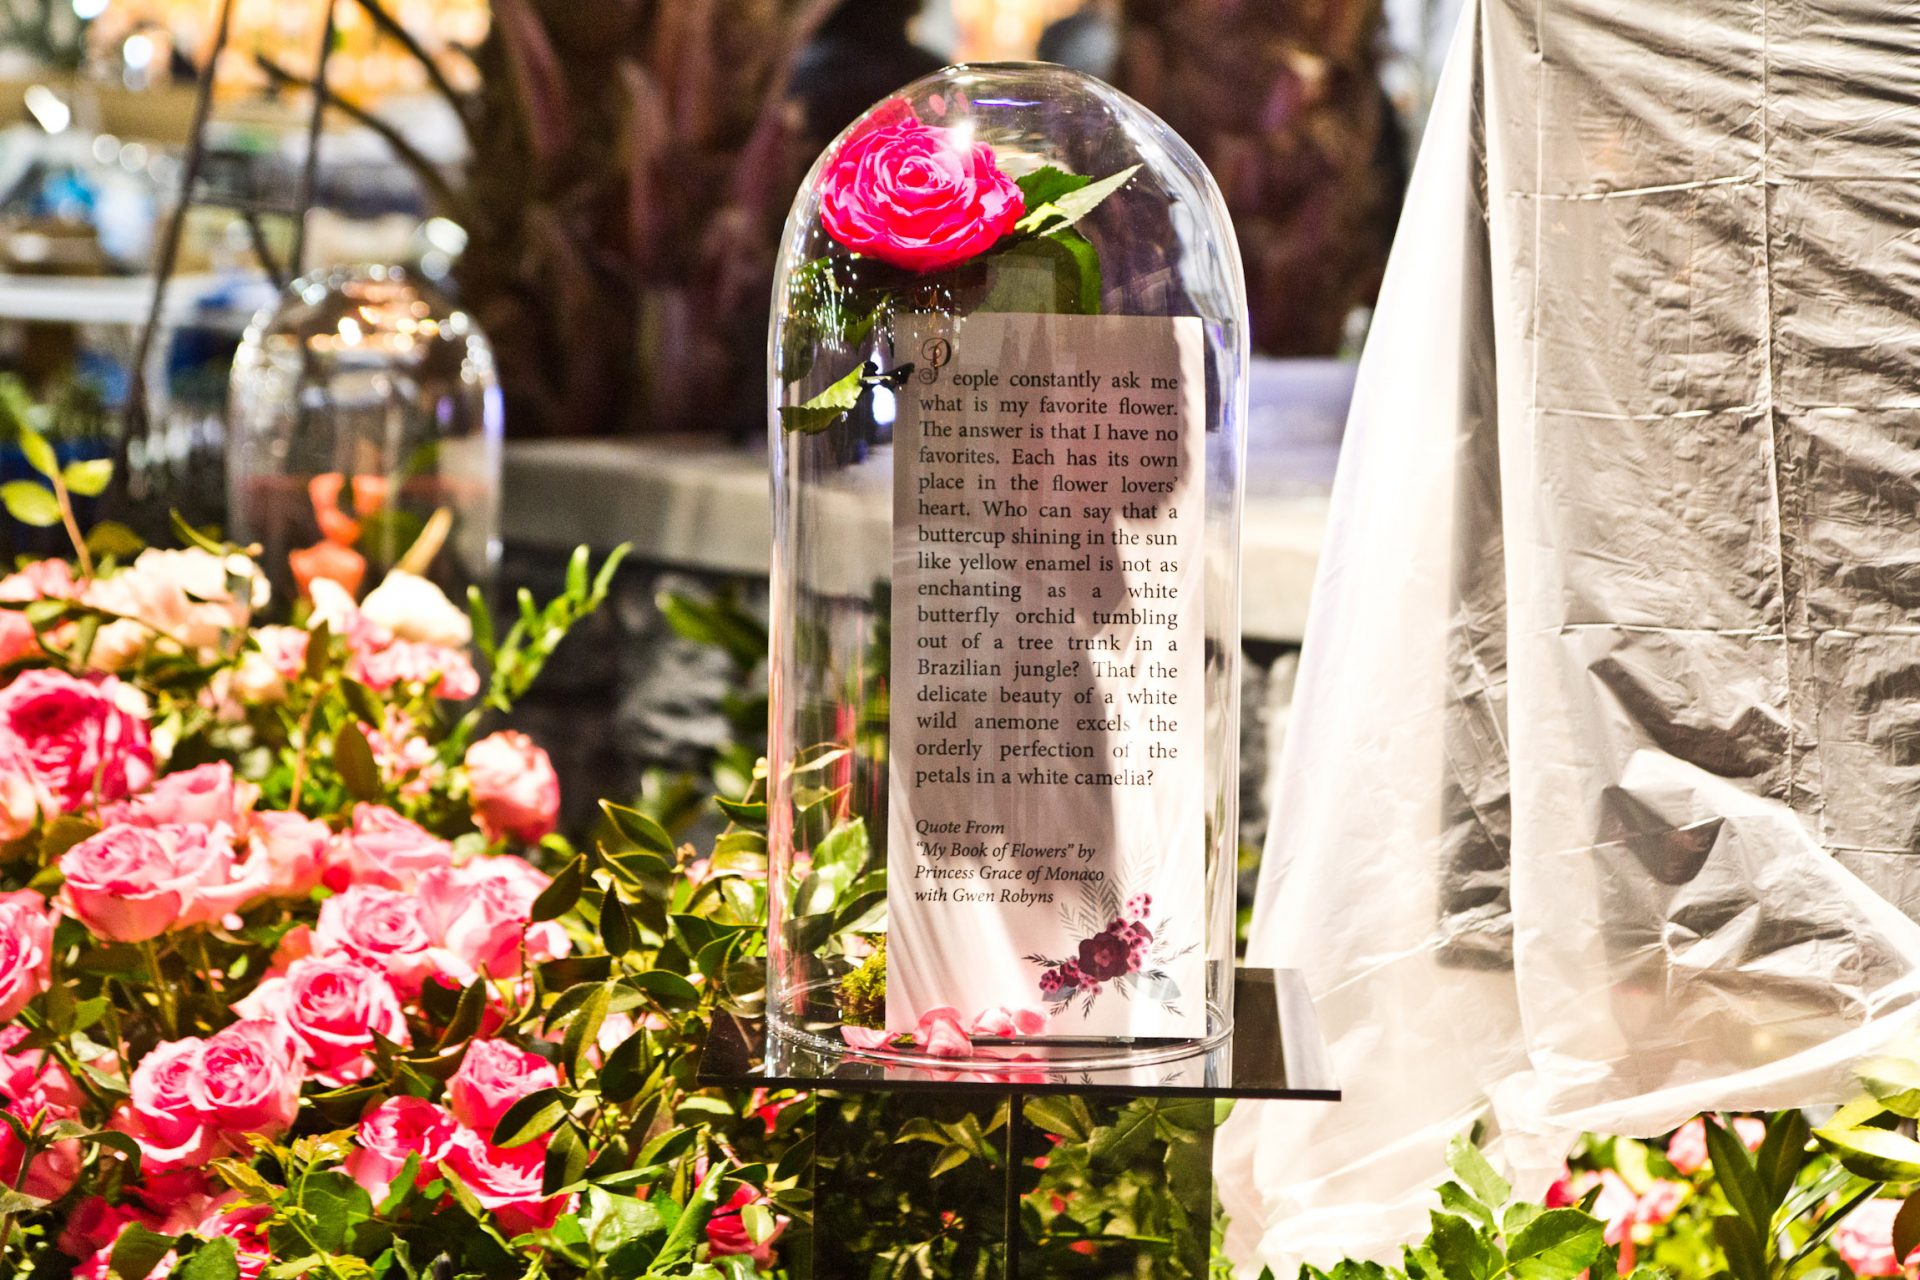 The Princess Grace Rose Garden at the 2020 Philadelphia Flower Show features quotes from Grace Kelly, Princess of Monaco’s “My Book of Flowers.”